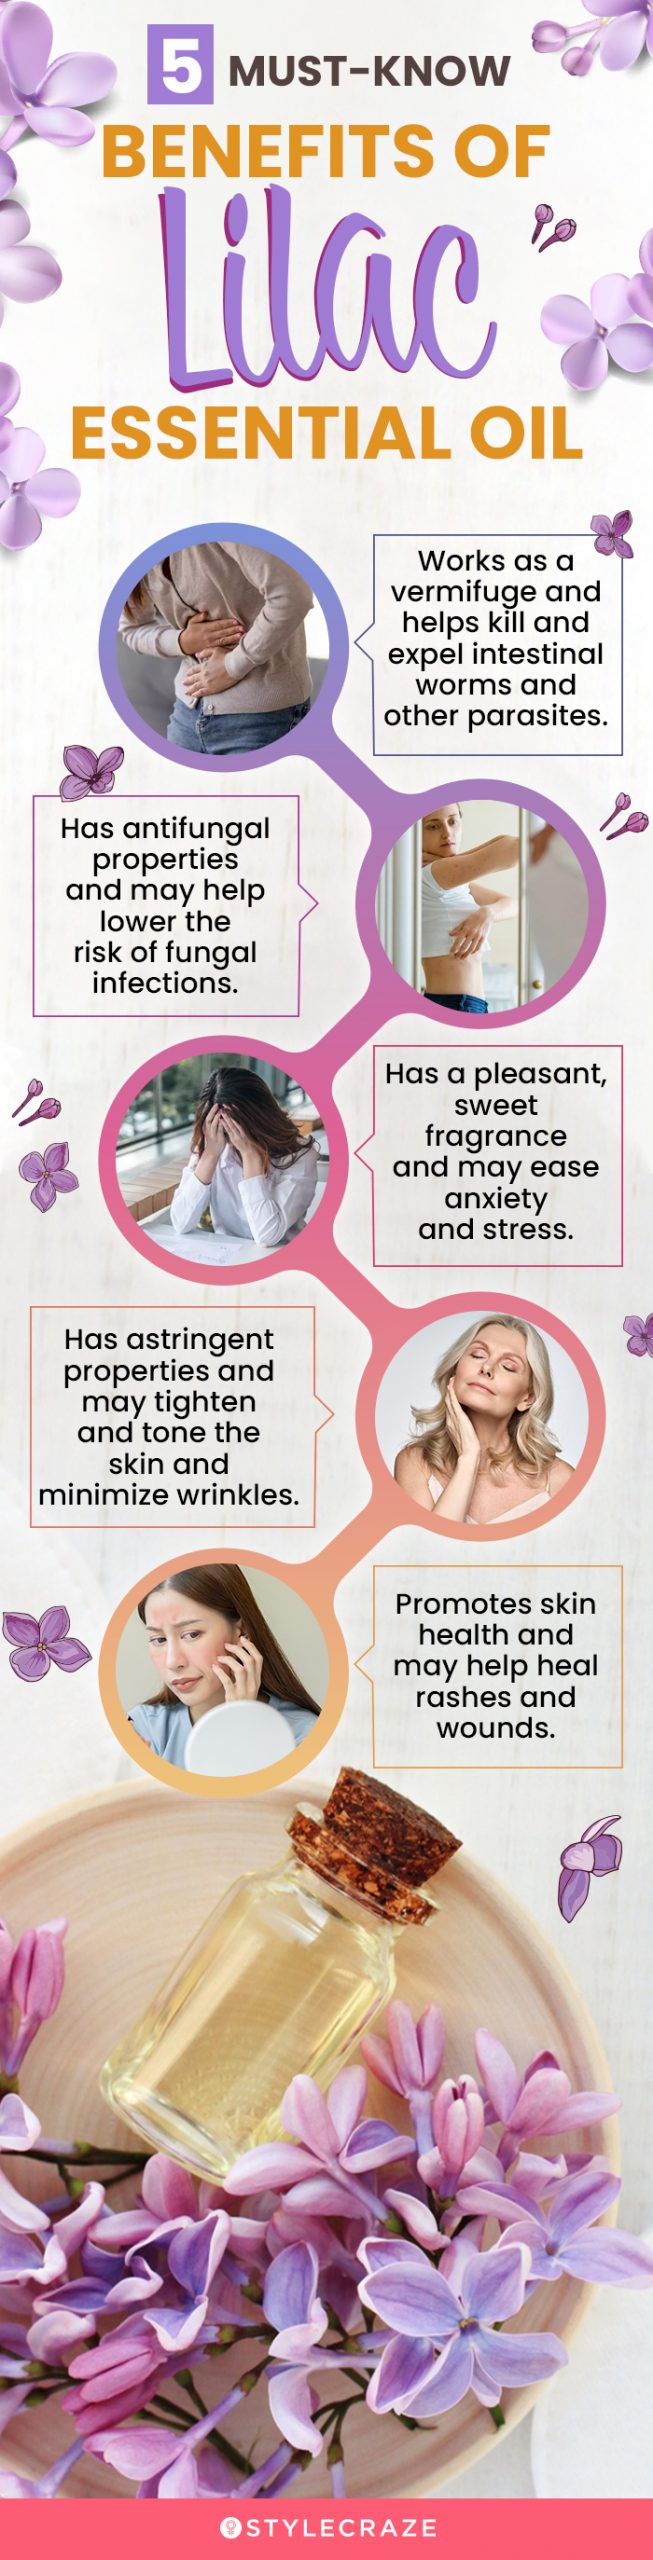 5 must know benefits of lilac essential oil (infographic)